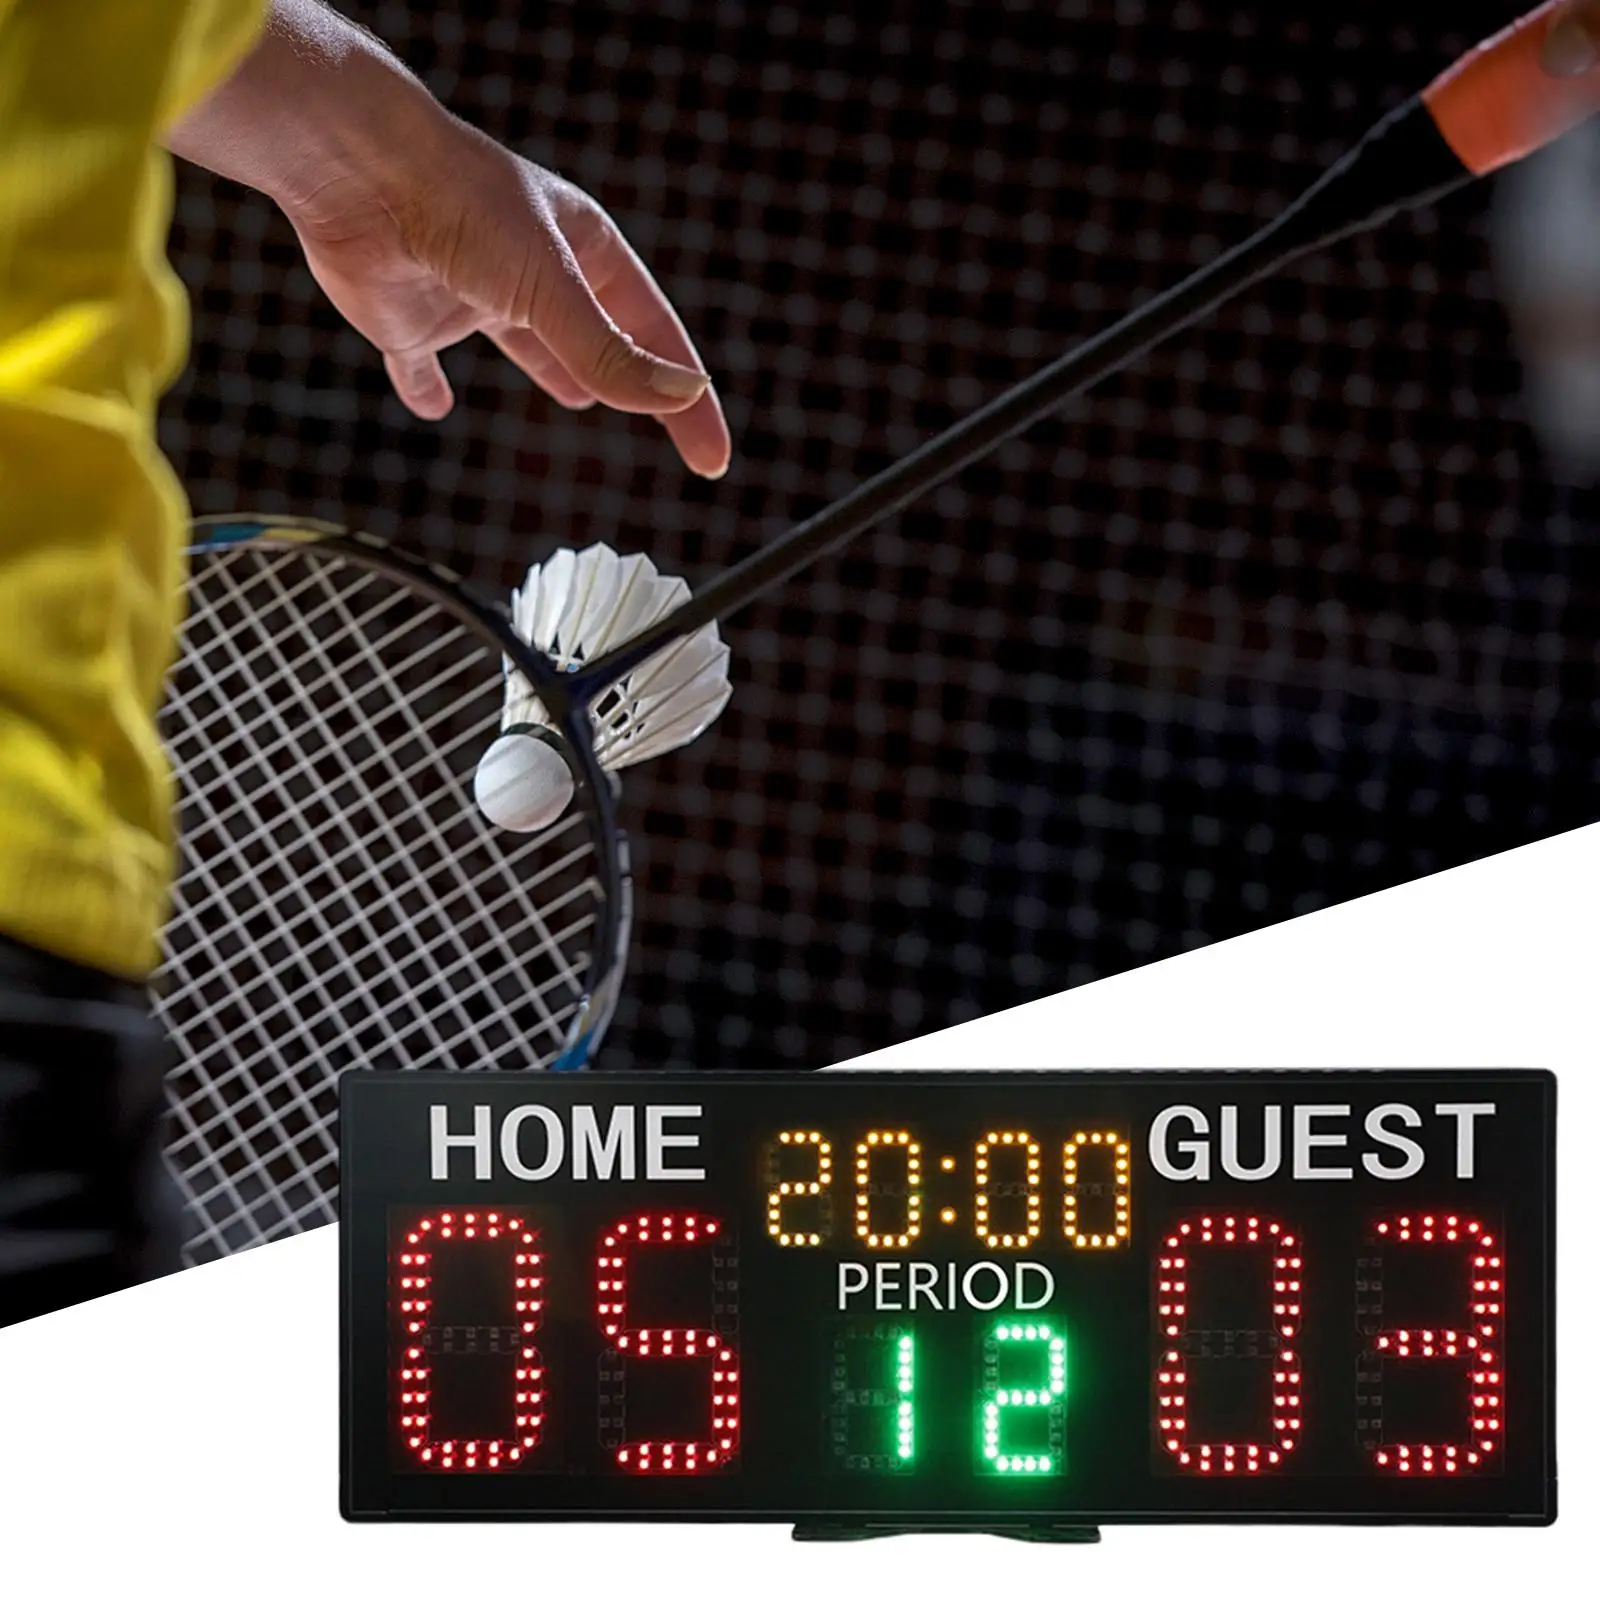 Tennis Score Keeper Tabletop Professional Countdown Timer & Score Electronic Scoreboard for Soccer Baseball Outdoor Sports Games